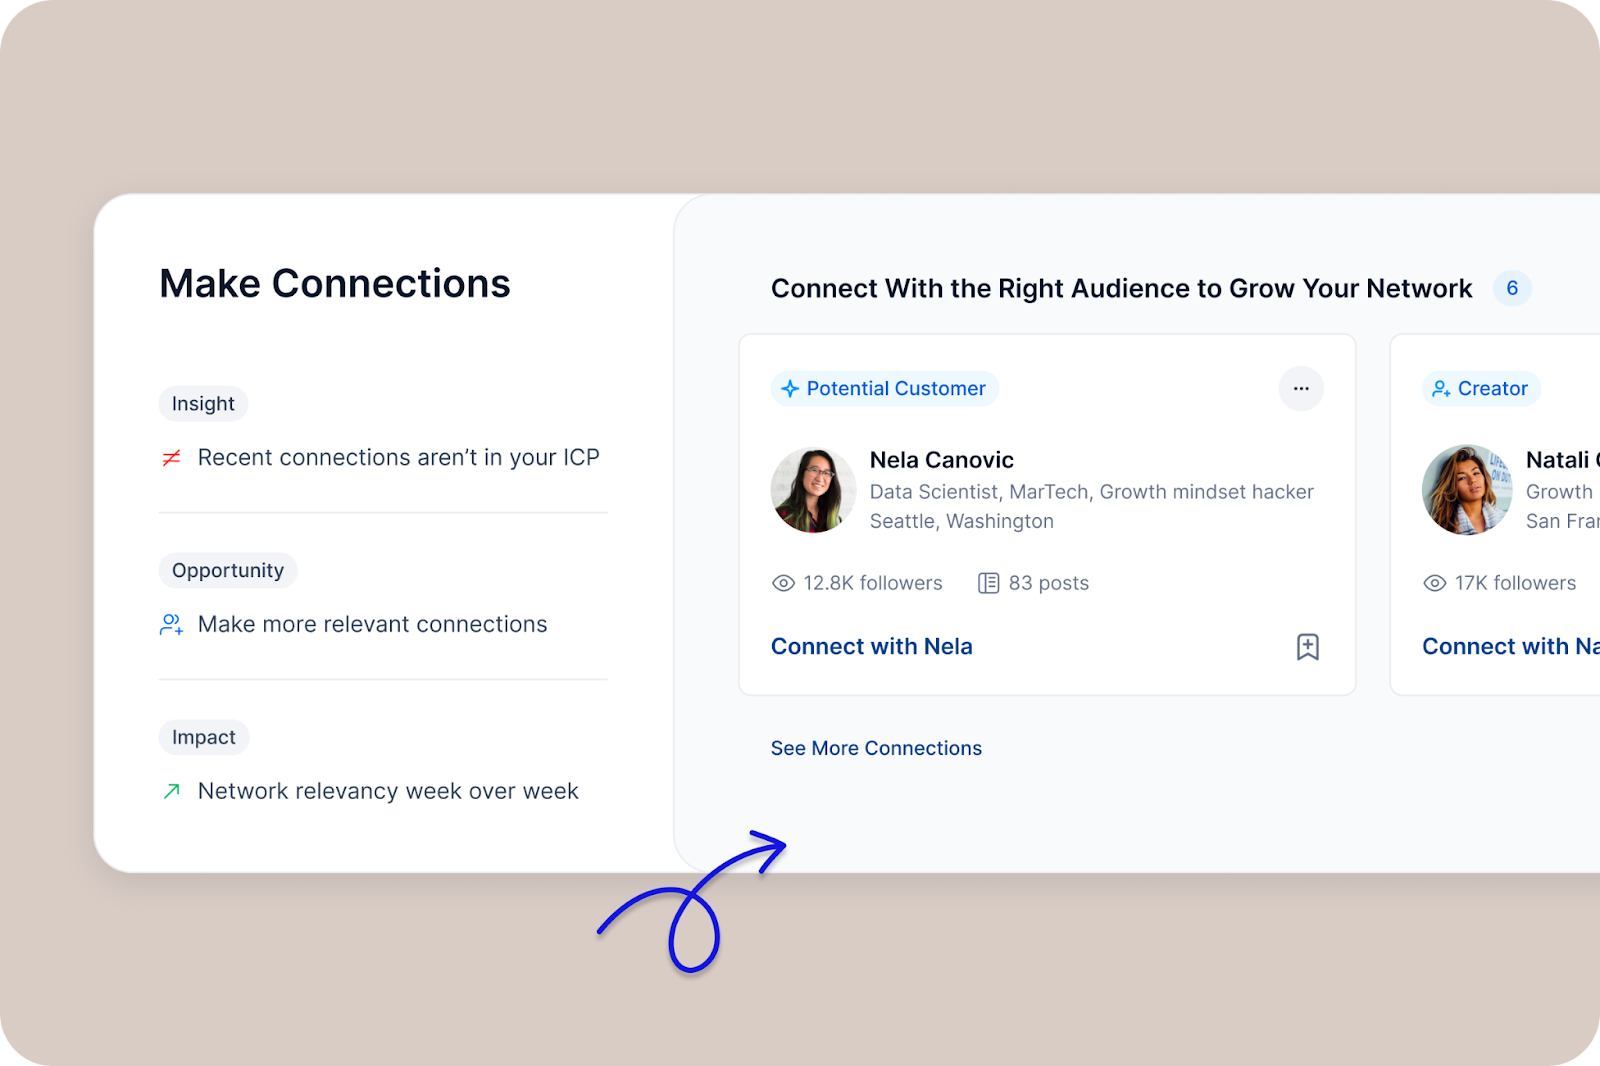 Queue 'Make Connections' feature interface showing a section for 'Connect With the Right Audience to Grow Your Network' with potential customer Nela Canovic highlighted, including her title as Data Scientist in MarTech and a prompt to connect with her."